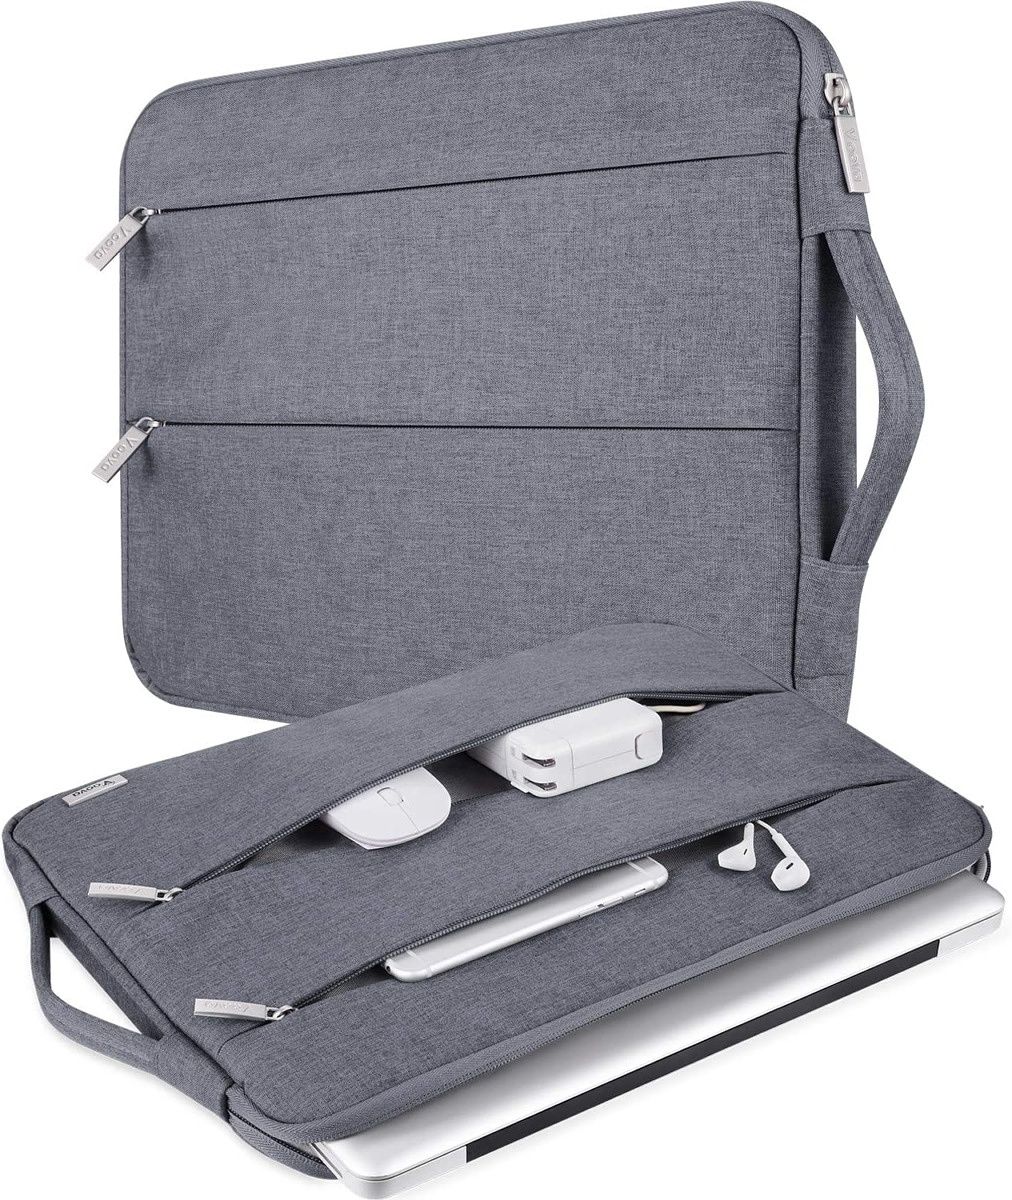 Available in nine different colors to choose from, this carrying case from V Voova has a handle for convenience and includes multiple pockets for accessory storage.